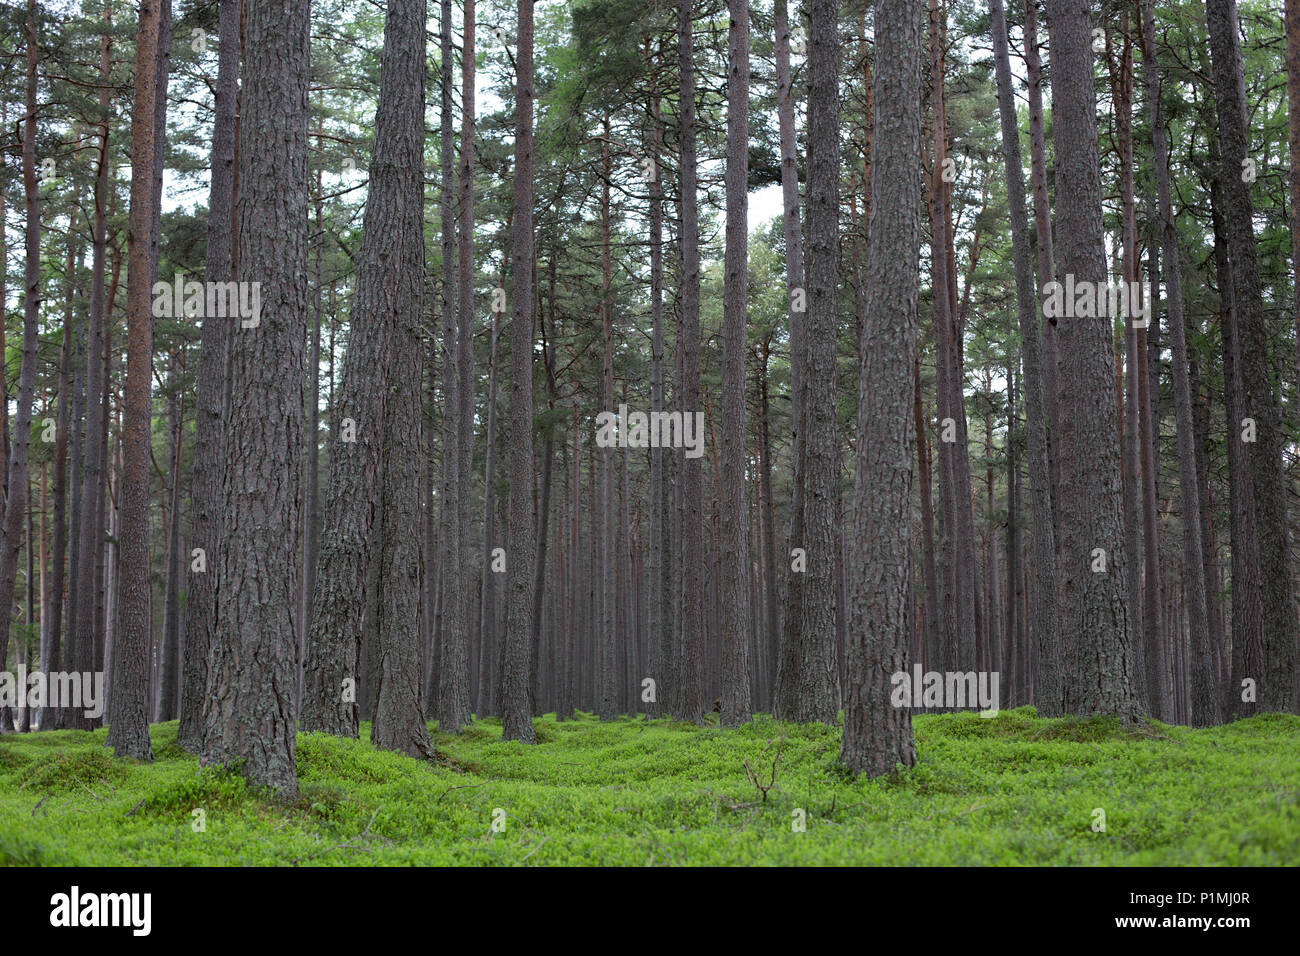 A heavily wooded forest, Mar Lodge Estate, Braemar, Aberdeenshire, Scotland Stock Photo